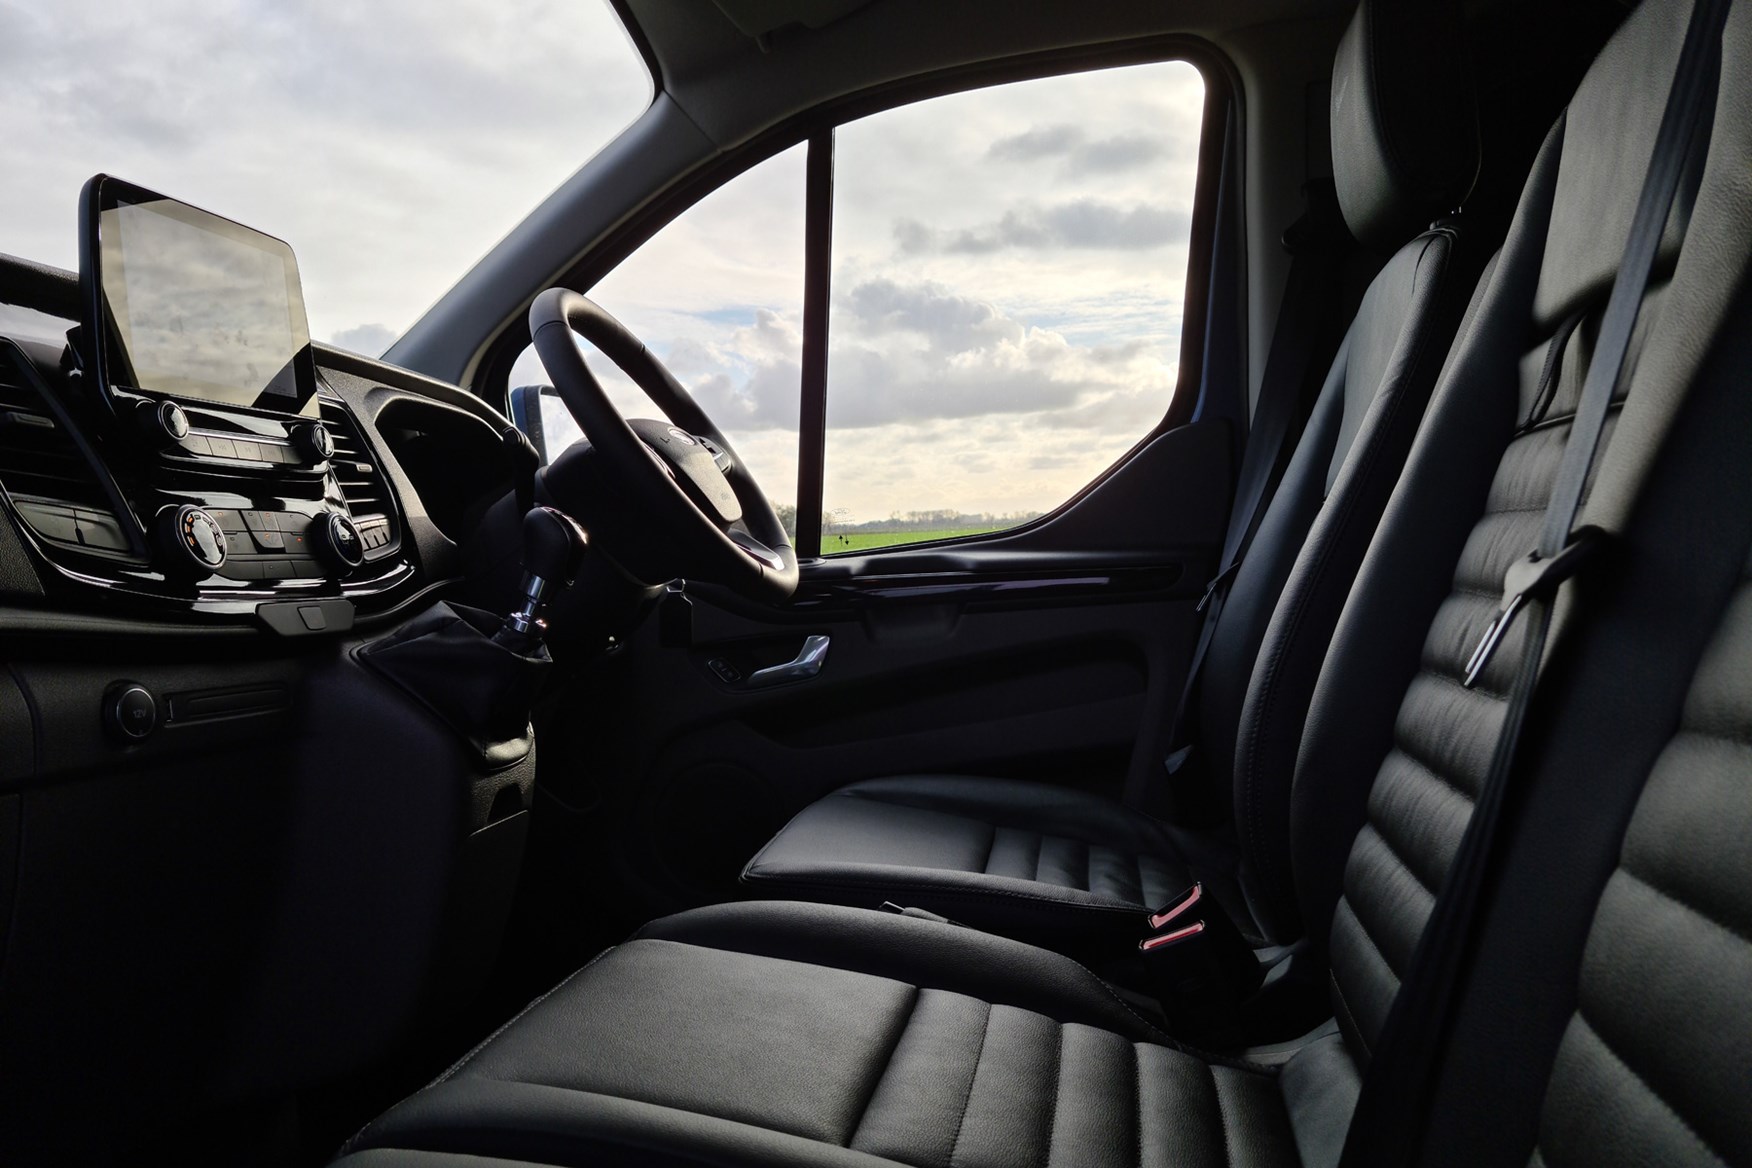 Ford Transit Custom Trail review, L2, DCiV, 2020, black leather front seats